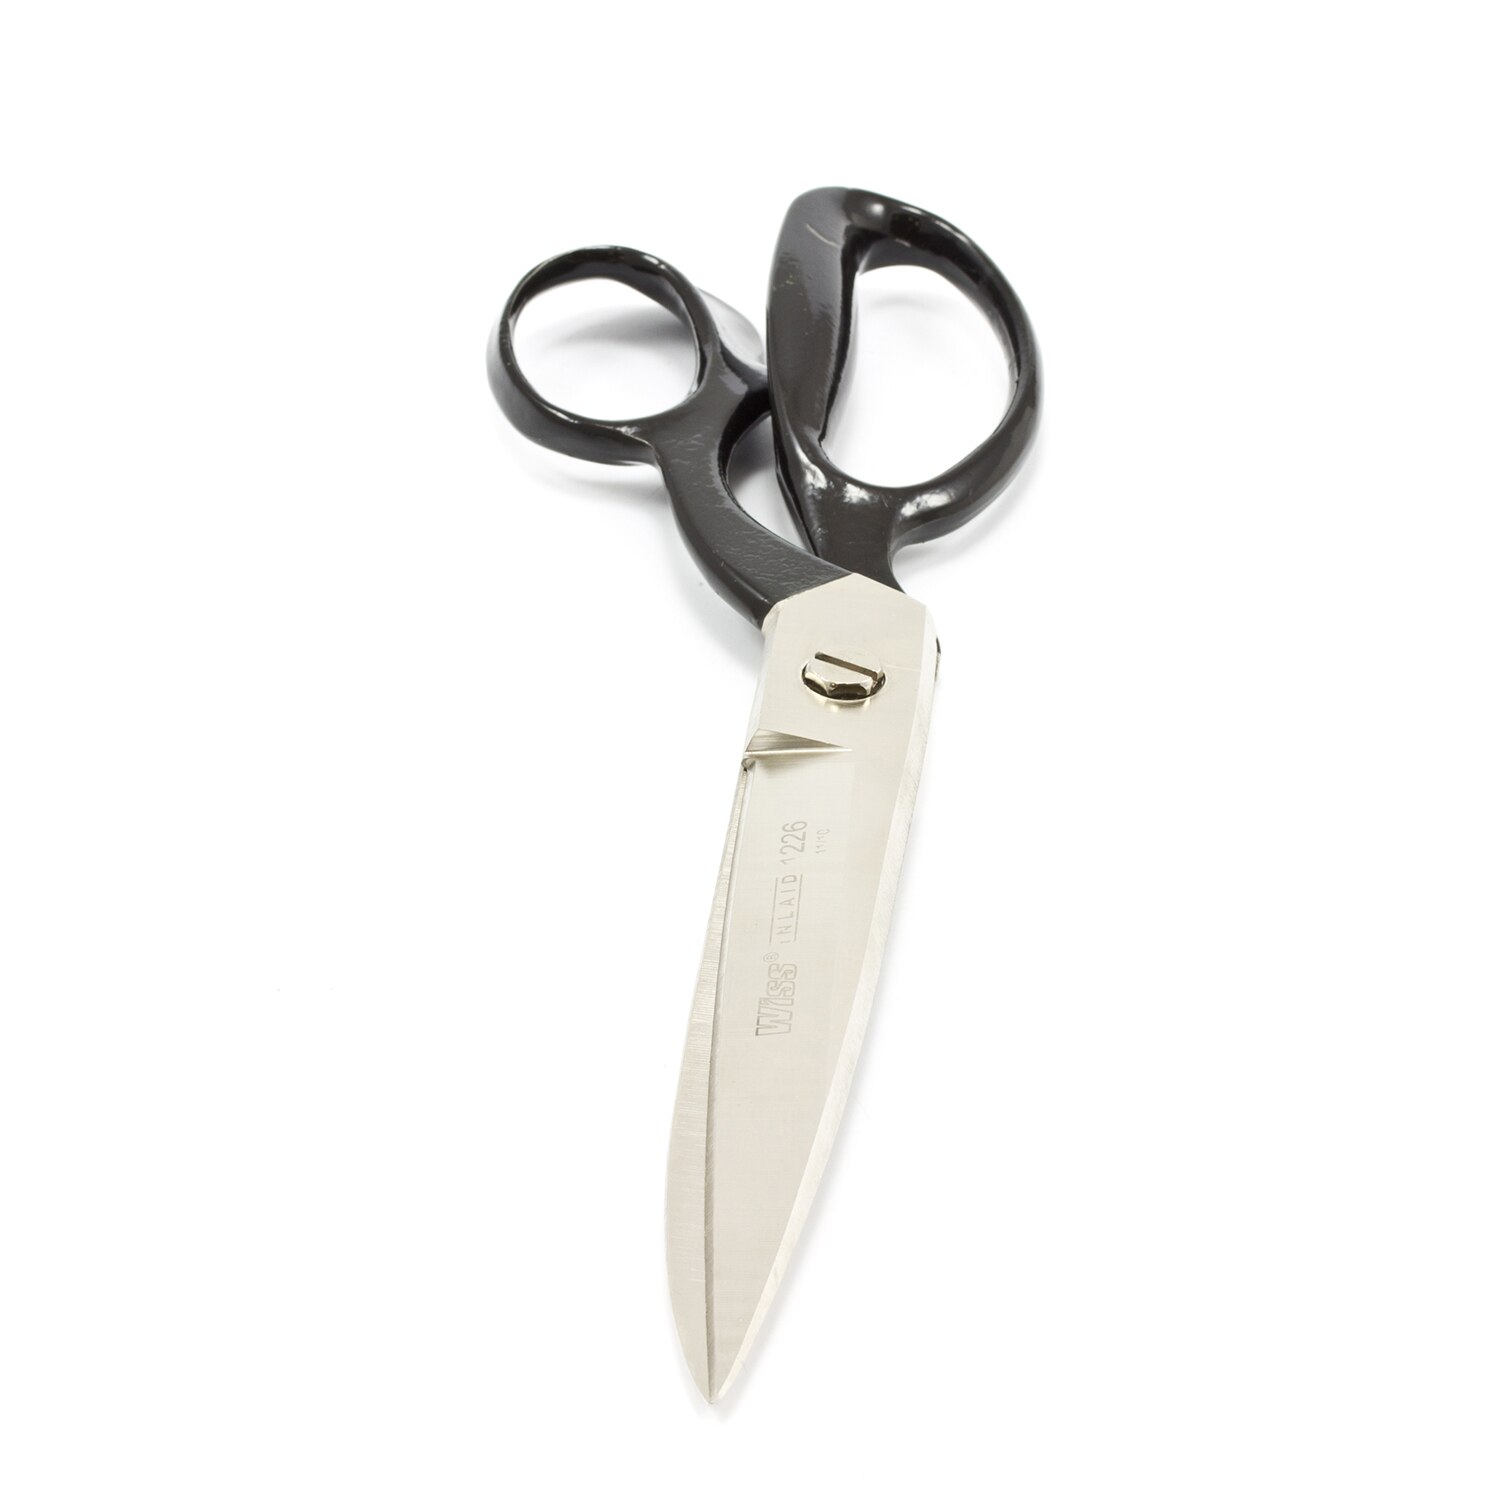 Buy Wiss® Knife Edge Upholstery, Carpet and Fabric Shears #1226 12